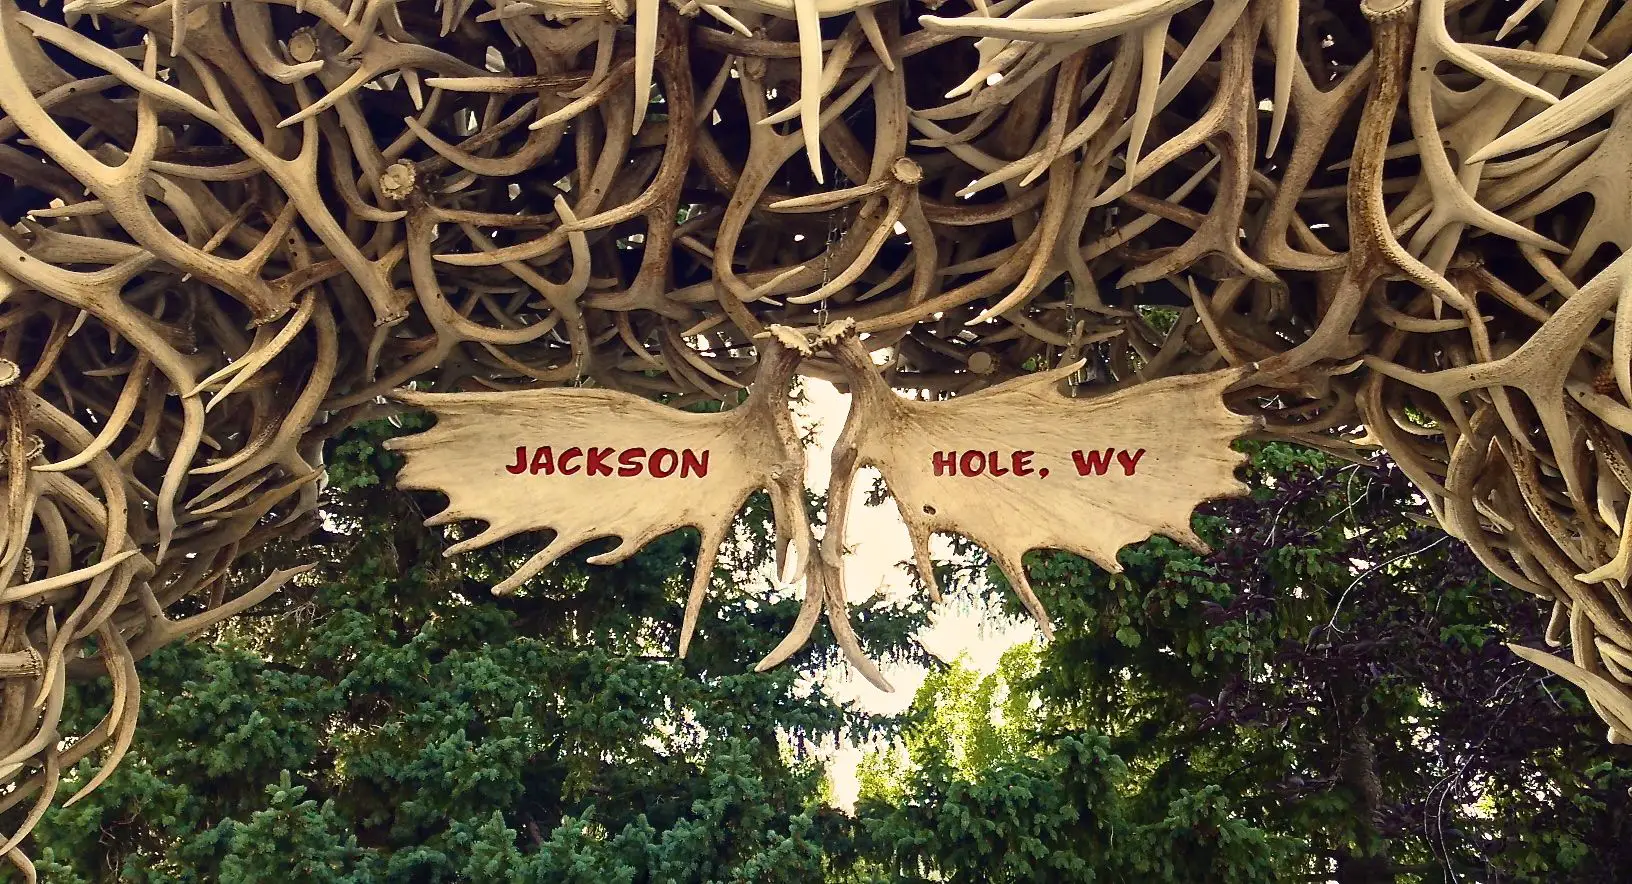 Songs about Jackson Hole, Wyoming - Arches made of elk antlers welcome visitors to the center of Jackson, Wyoming